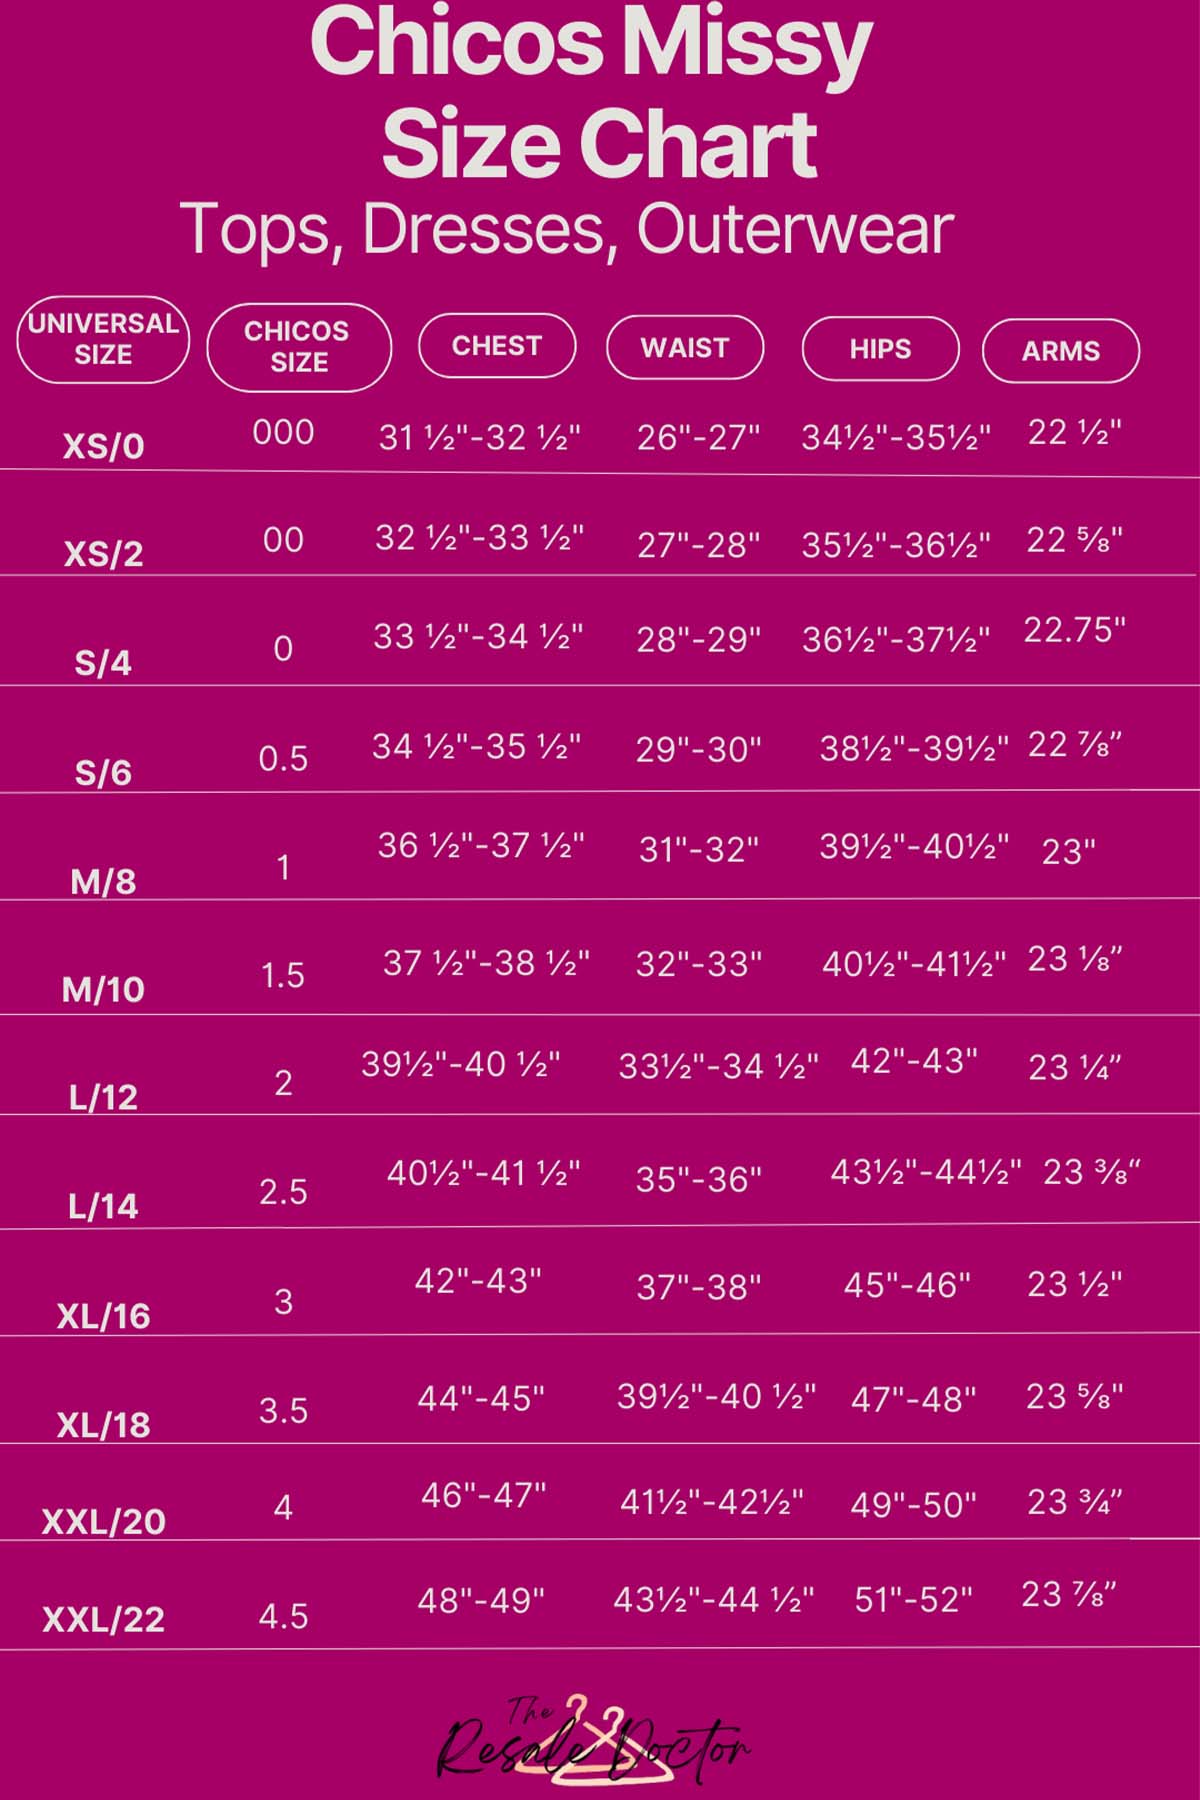 a chicos size chart for missy tops, bottoms, and outerwear.